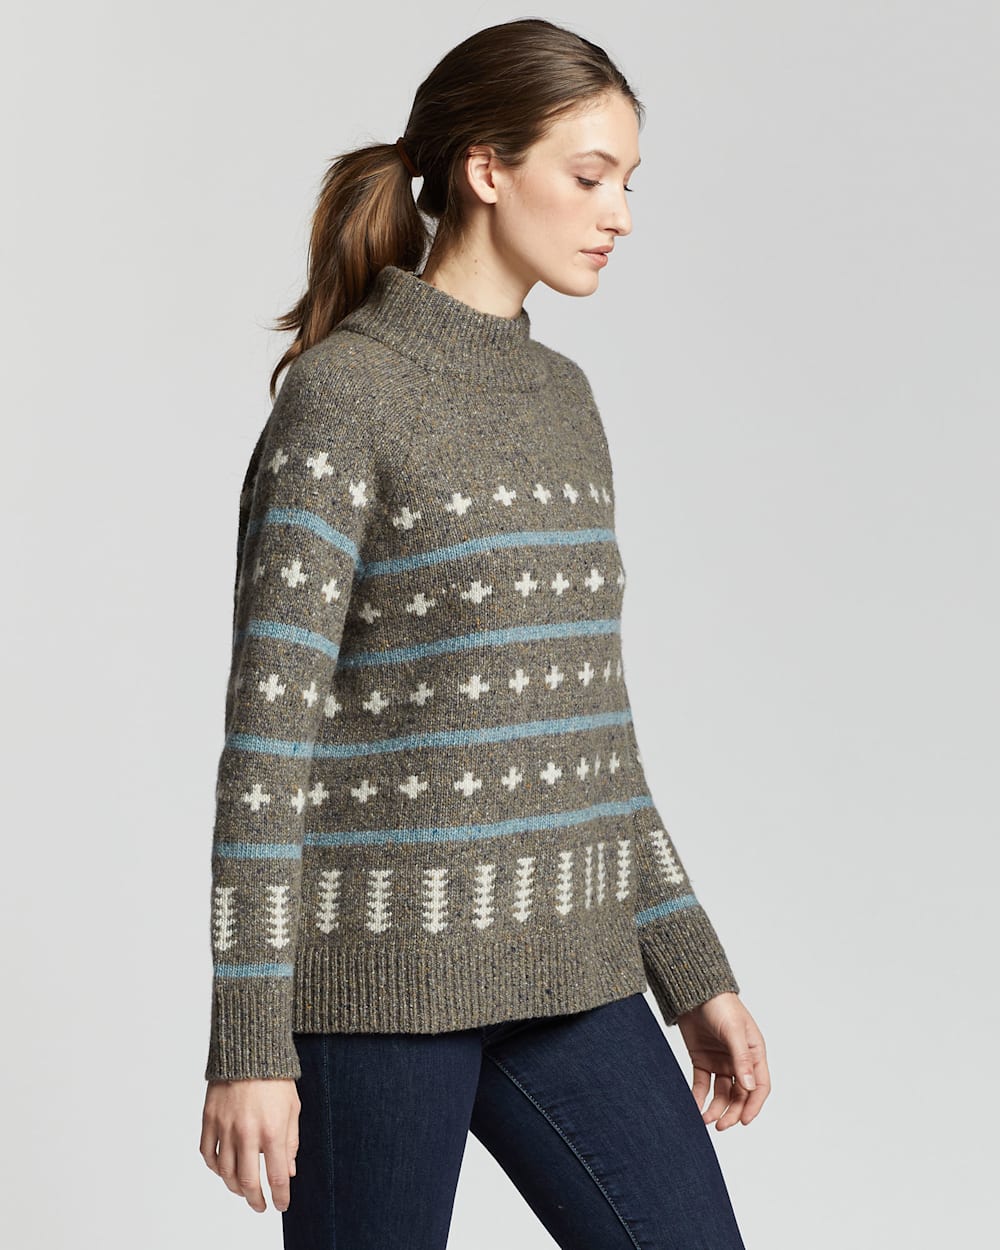 ALTERNATE VIEW OF WOMEN'S GRAPHIC DONEGAL MERINO SWEATER IN GREY MULTI image number 3